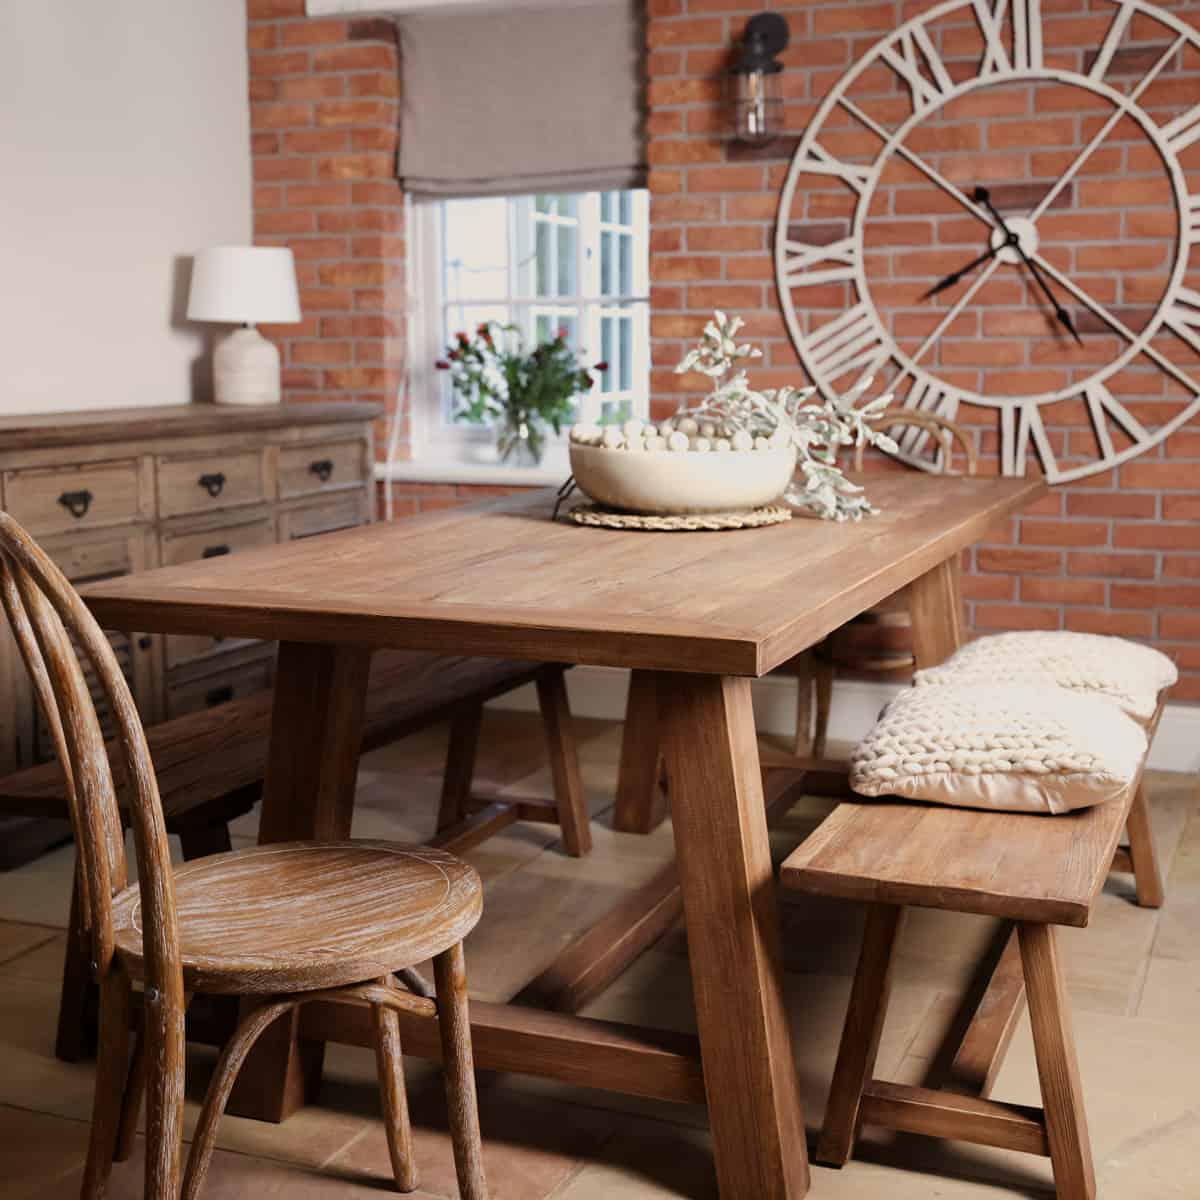 Oak dining set with table and bench, styled with bobble bowl and large clock in background.